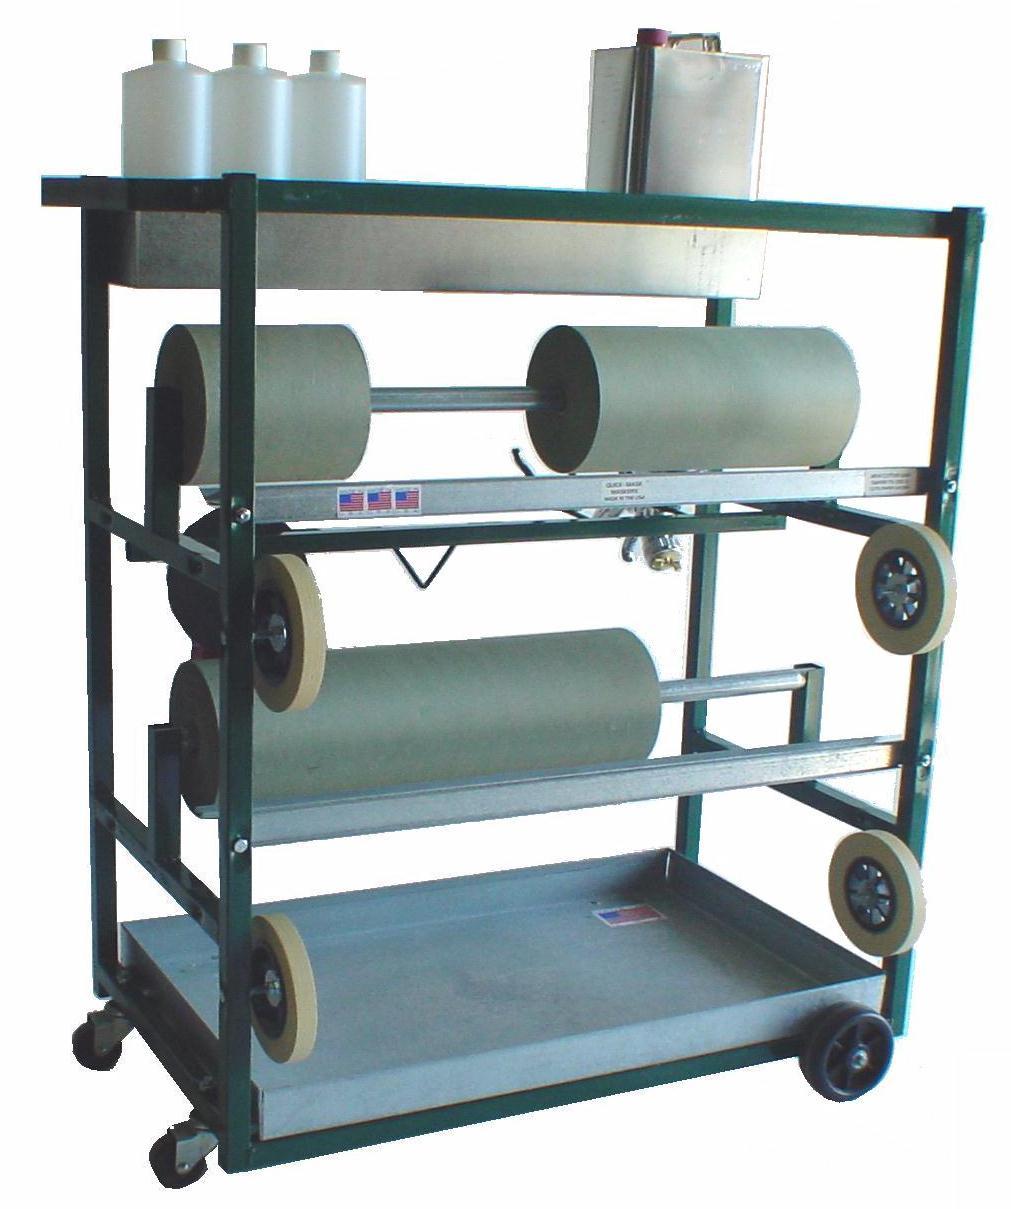 cans Made in the USA Measurements: 17 w x 30 l x 33 h 4-Roll Mini Prep Station Part No.